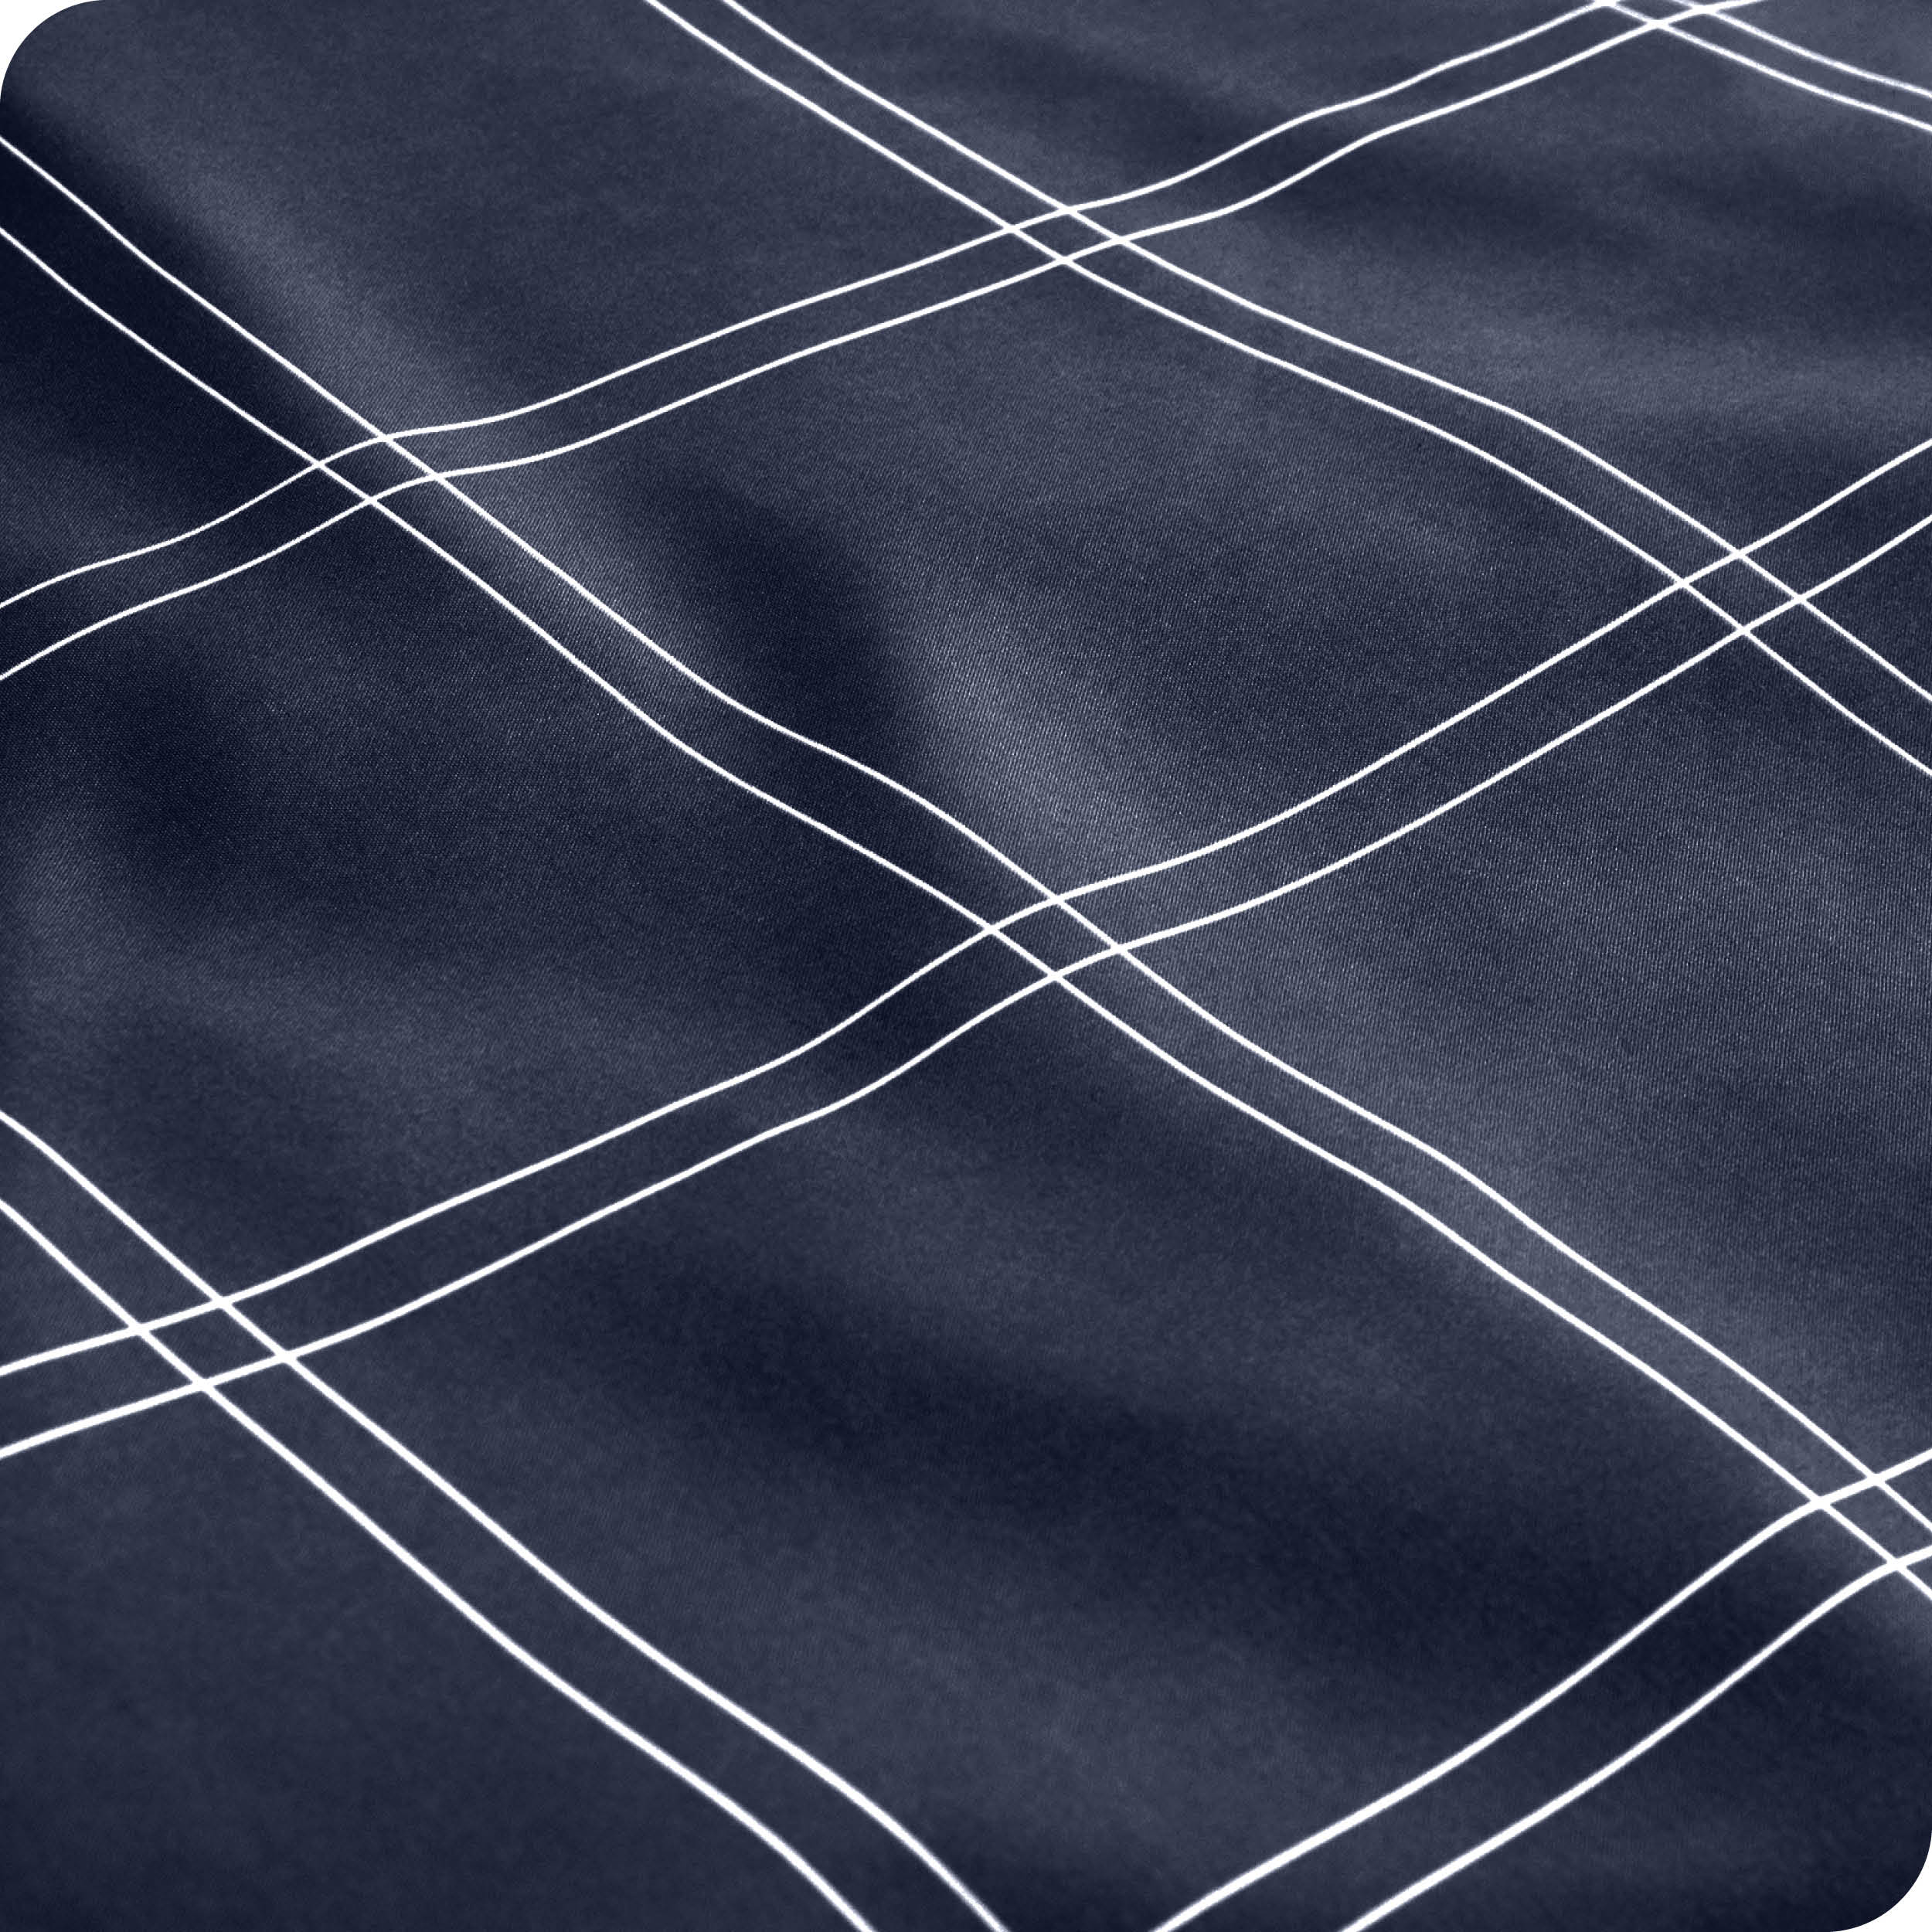 Close up of a printed microfiber sheet showing the pattern and texture